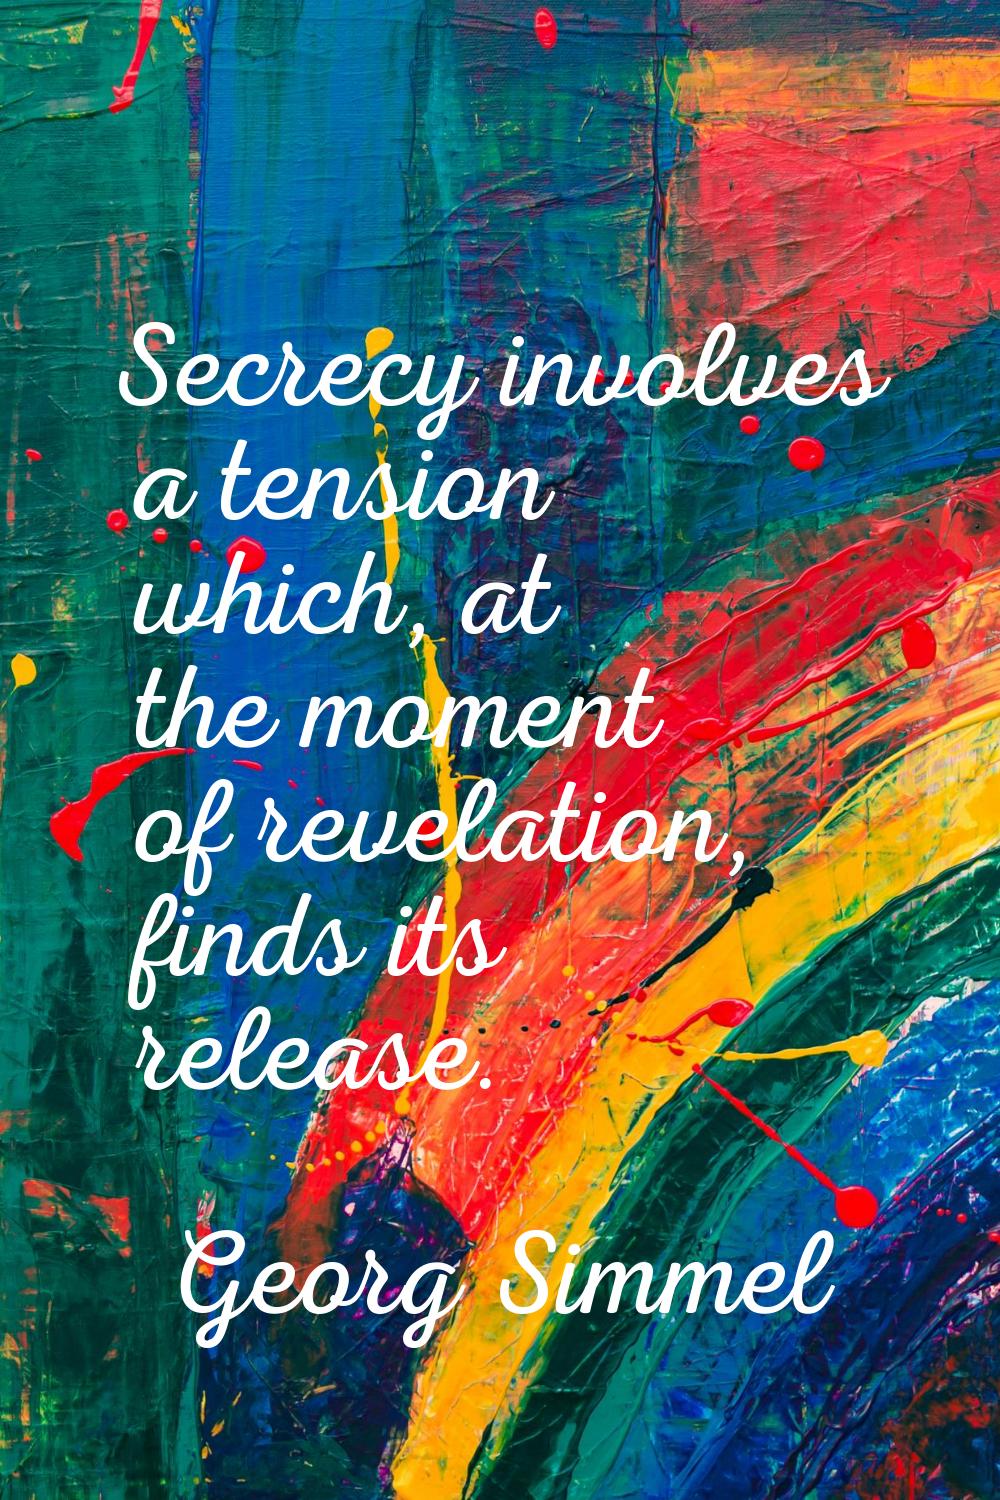 Secrecy involves a tension which, at the moment of revelation, finds its release.